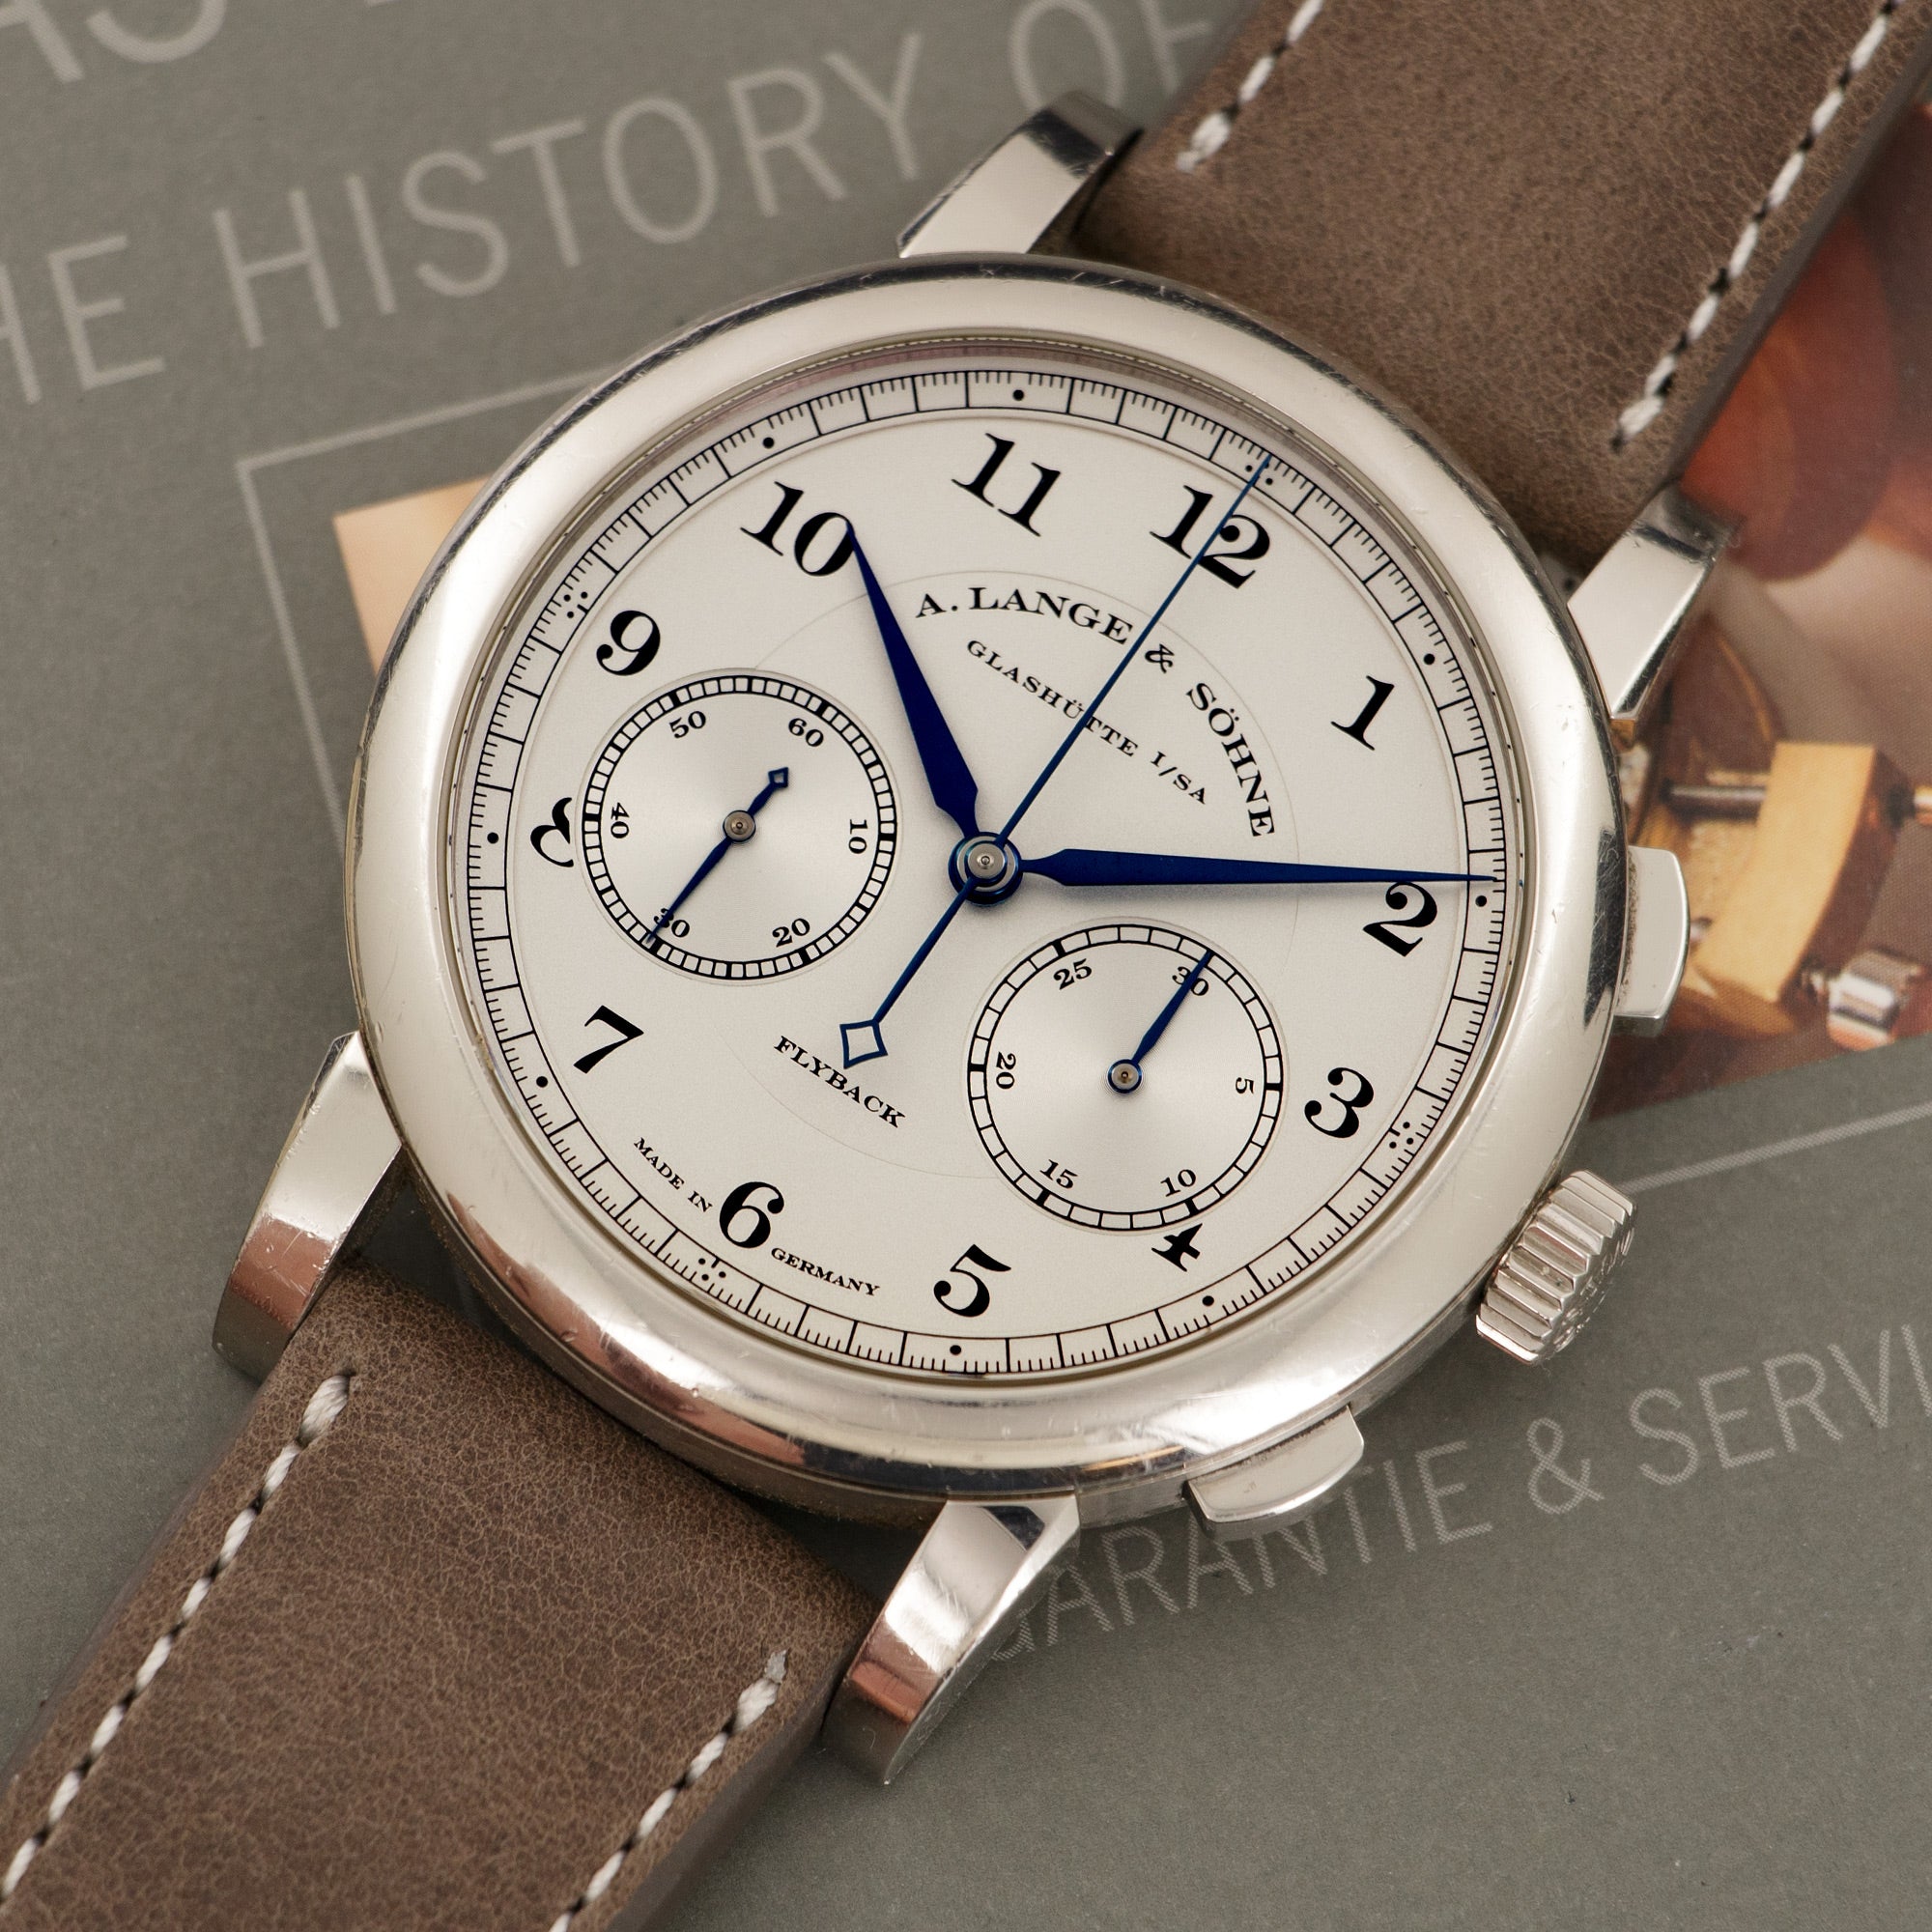 A. Lange &amp; Sohne - A. Lange &amp; Sohne White Gold 1815 Chronograph Watch 402.026 - The Keystone Watches